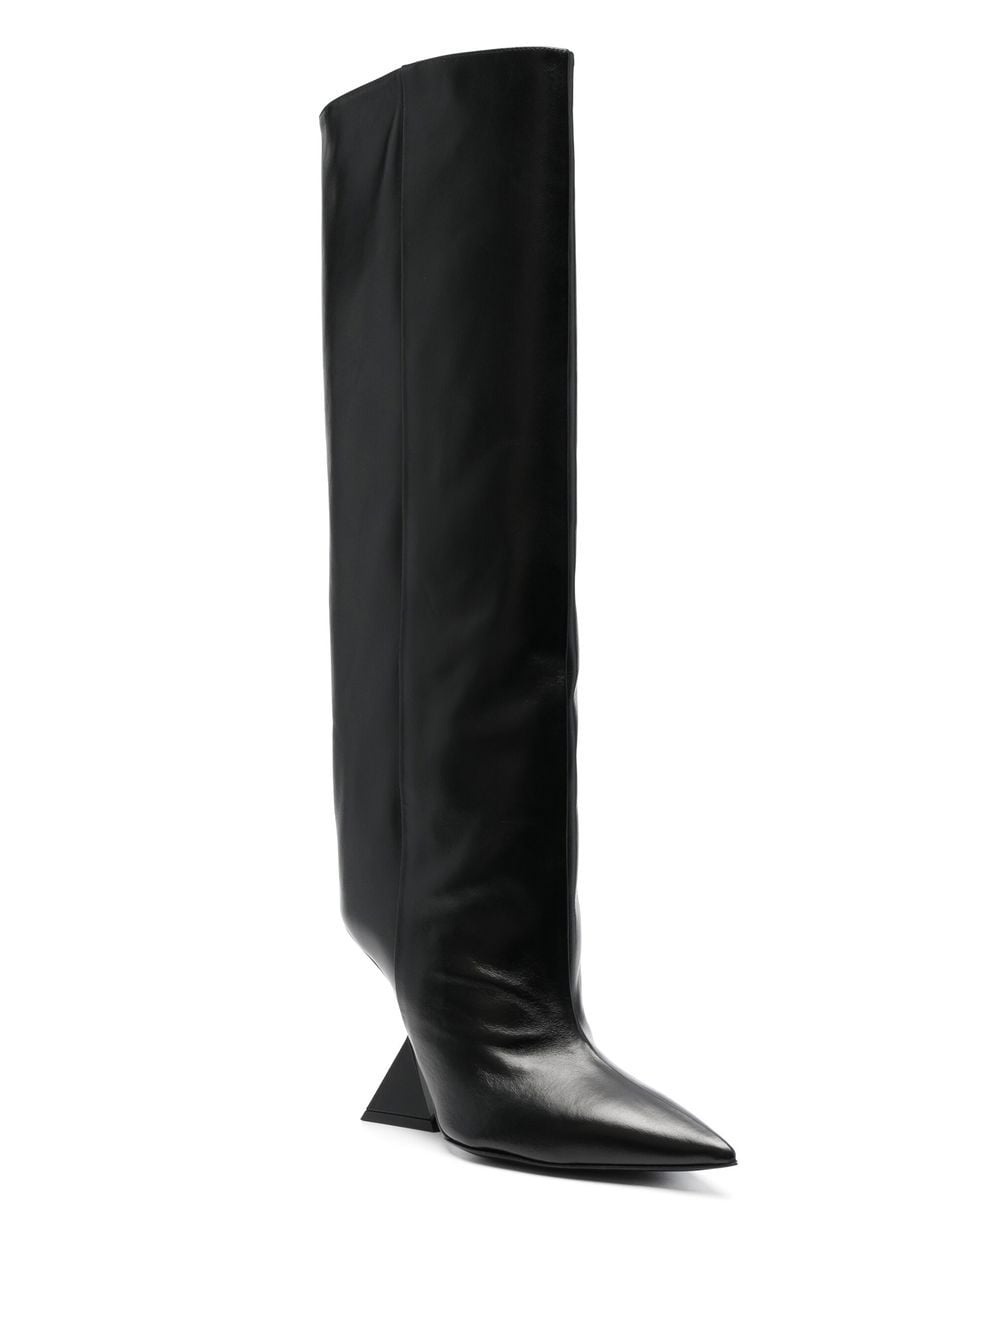 CHEOPE CALF LEATHER TUBE BOOT 105mm - 2